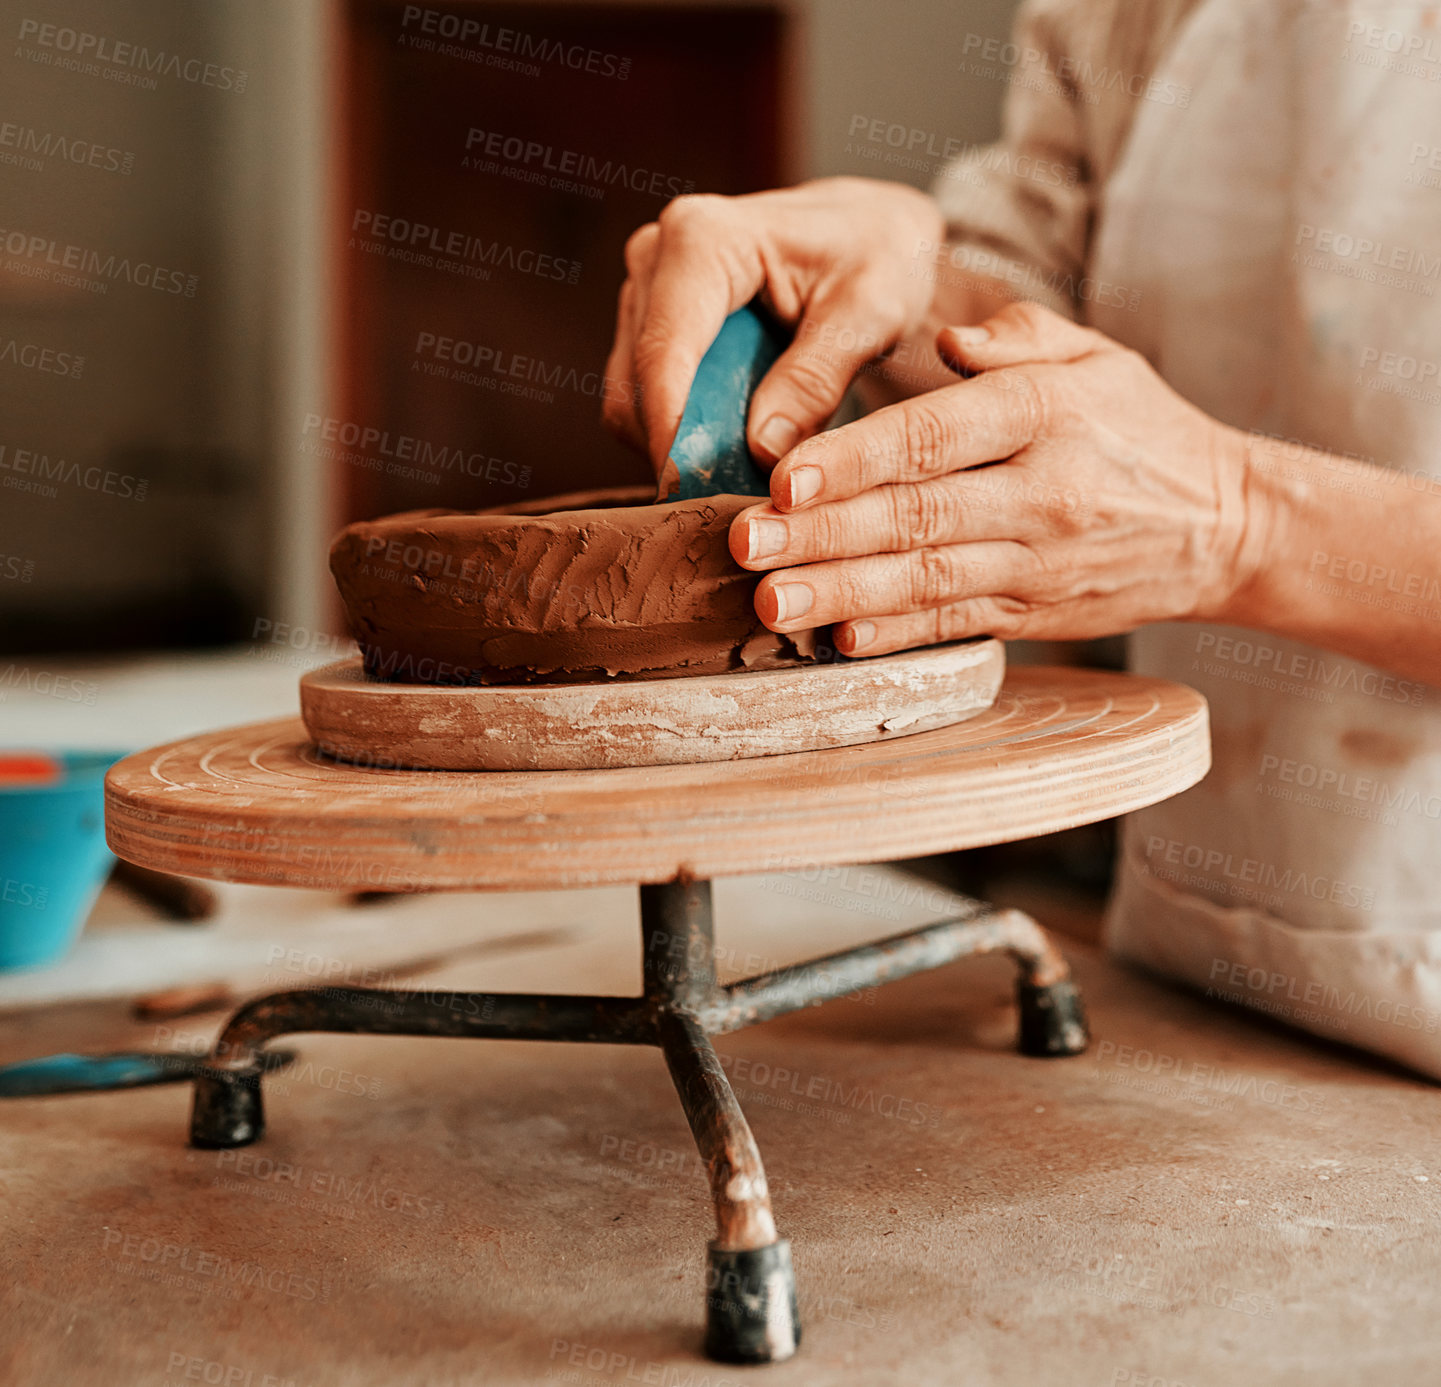 Buy stock photo Cropped shot of an unrecognizable woman shaping a clay pot in her workshop